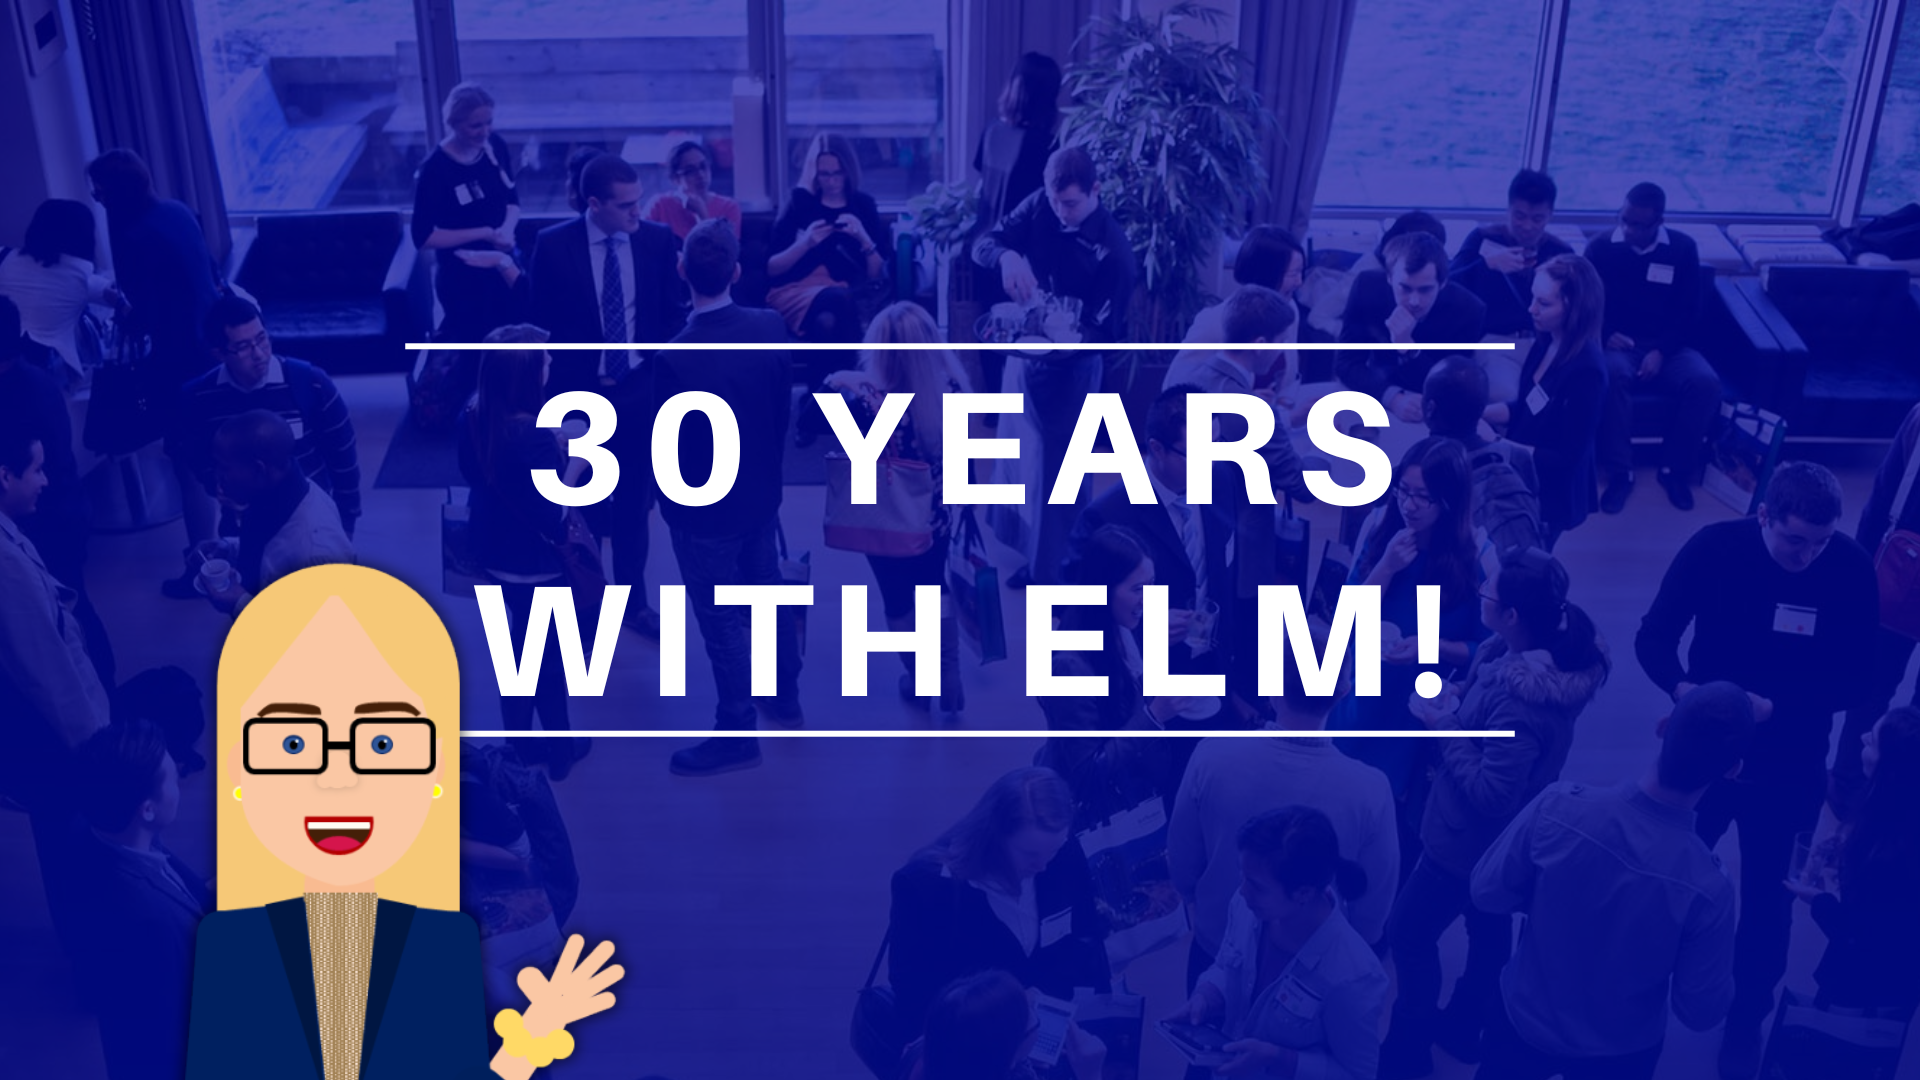 ELM’s 30th Anniversary: The Story Of How It Started